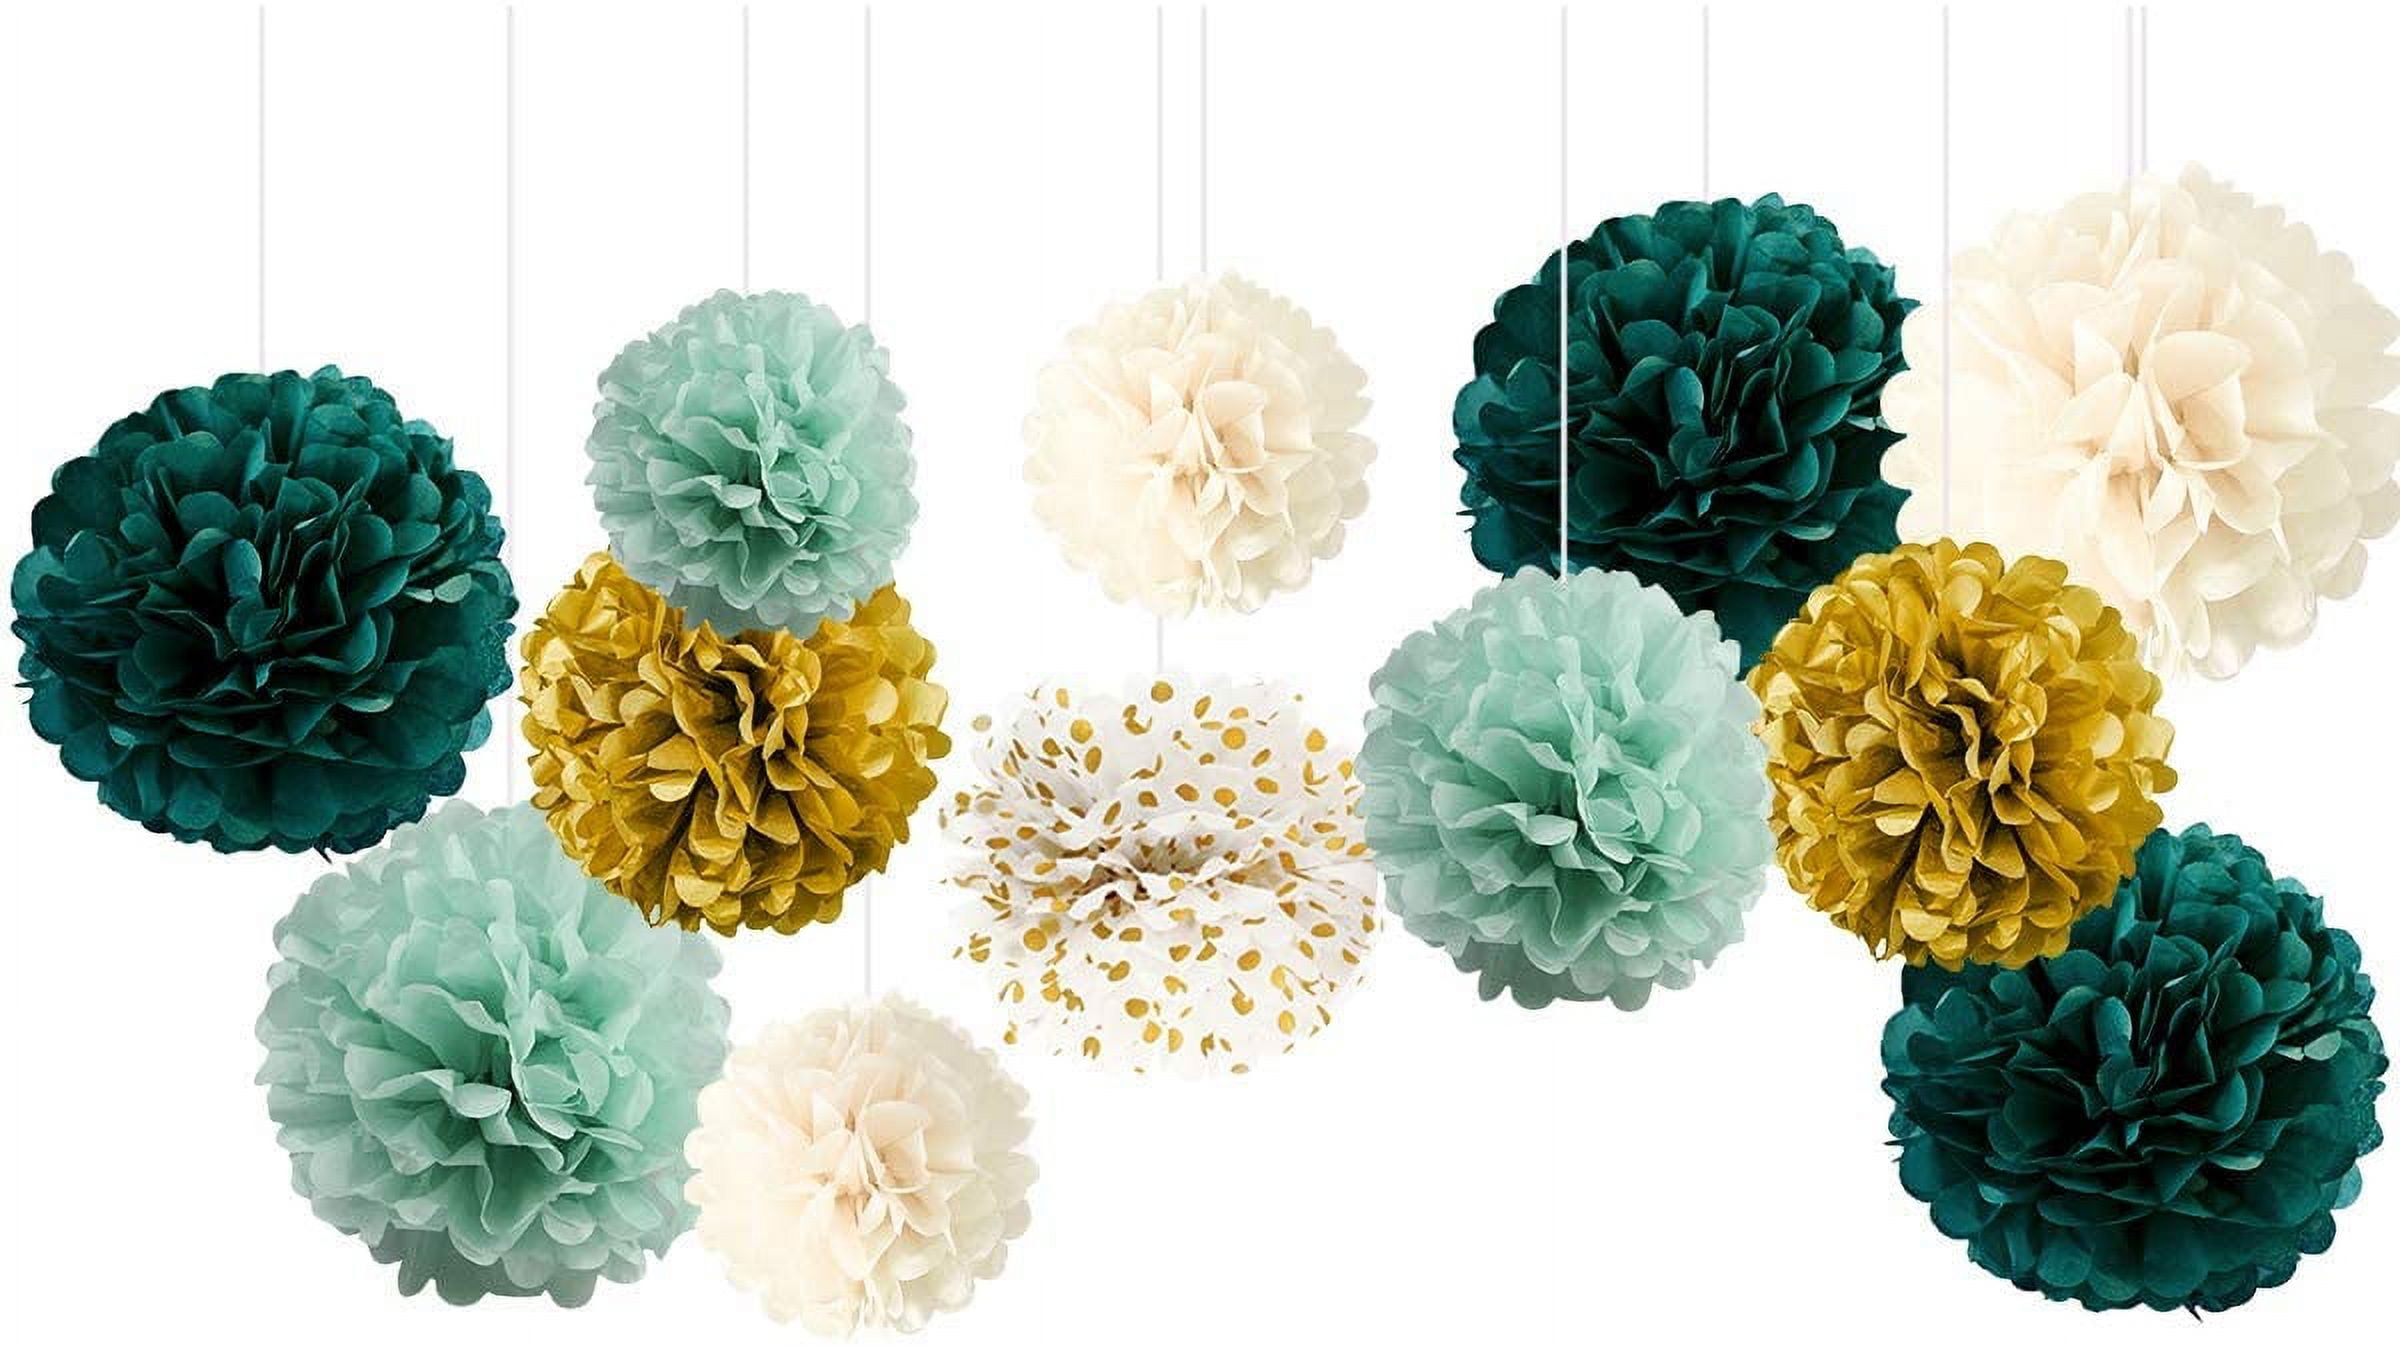 NICROHOME Baby Shower Decorations, 16PCS Sage Green, Bright Orange Tissue  Paper Pom Poms for Birthday, Wedding, Spring Summer Party